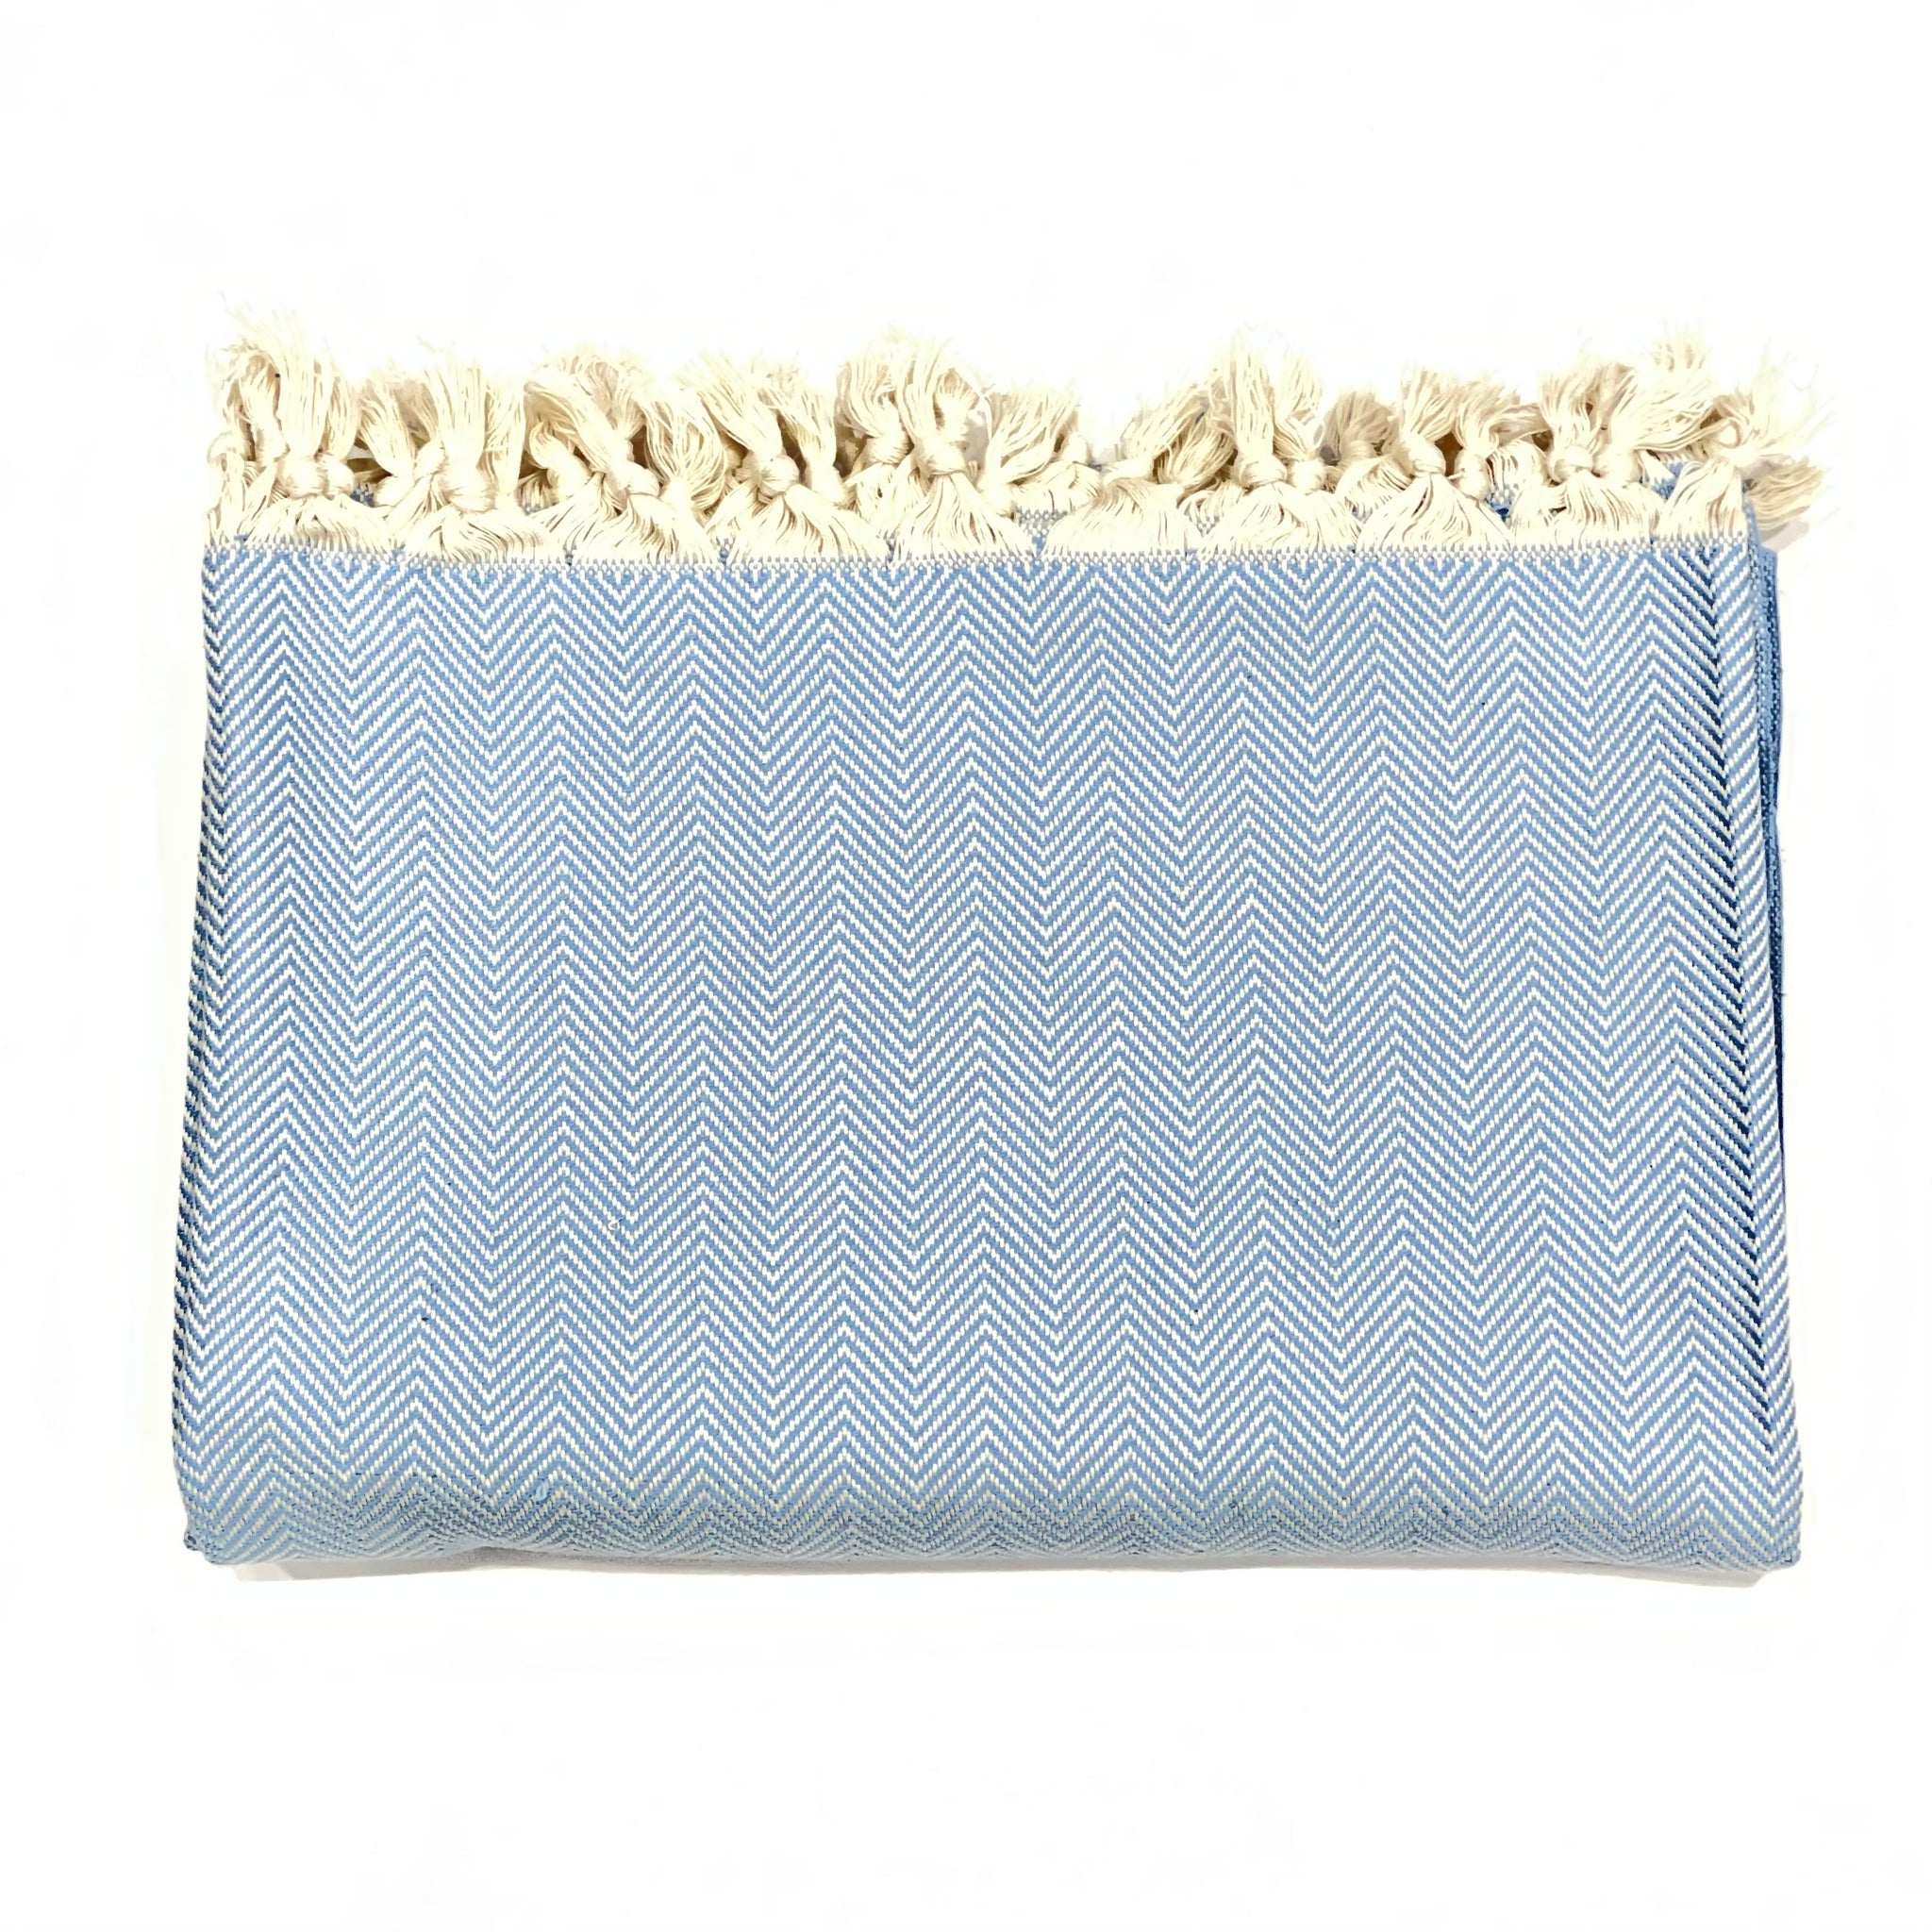 This beautiful throw blanket is hand loomed in a baby blue herringbone pattern with 100% Turkish Cotton. Known for its softness, comfort, light weight, hypoallergenic, and antimicrobial properties. Can be used as a throw blanket on a bed, couch, picnic, or even at the beach! Get ready to stay warm and comfy! Fair trade. Measure 71"x 94.5". XL King size. Perfect snuggle on the couch!